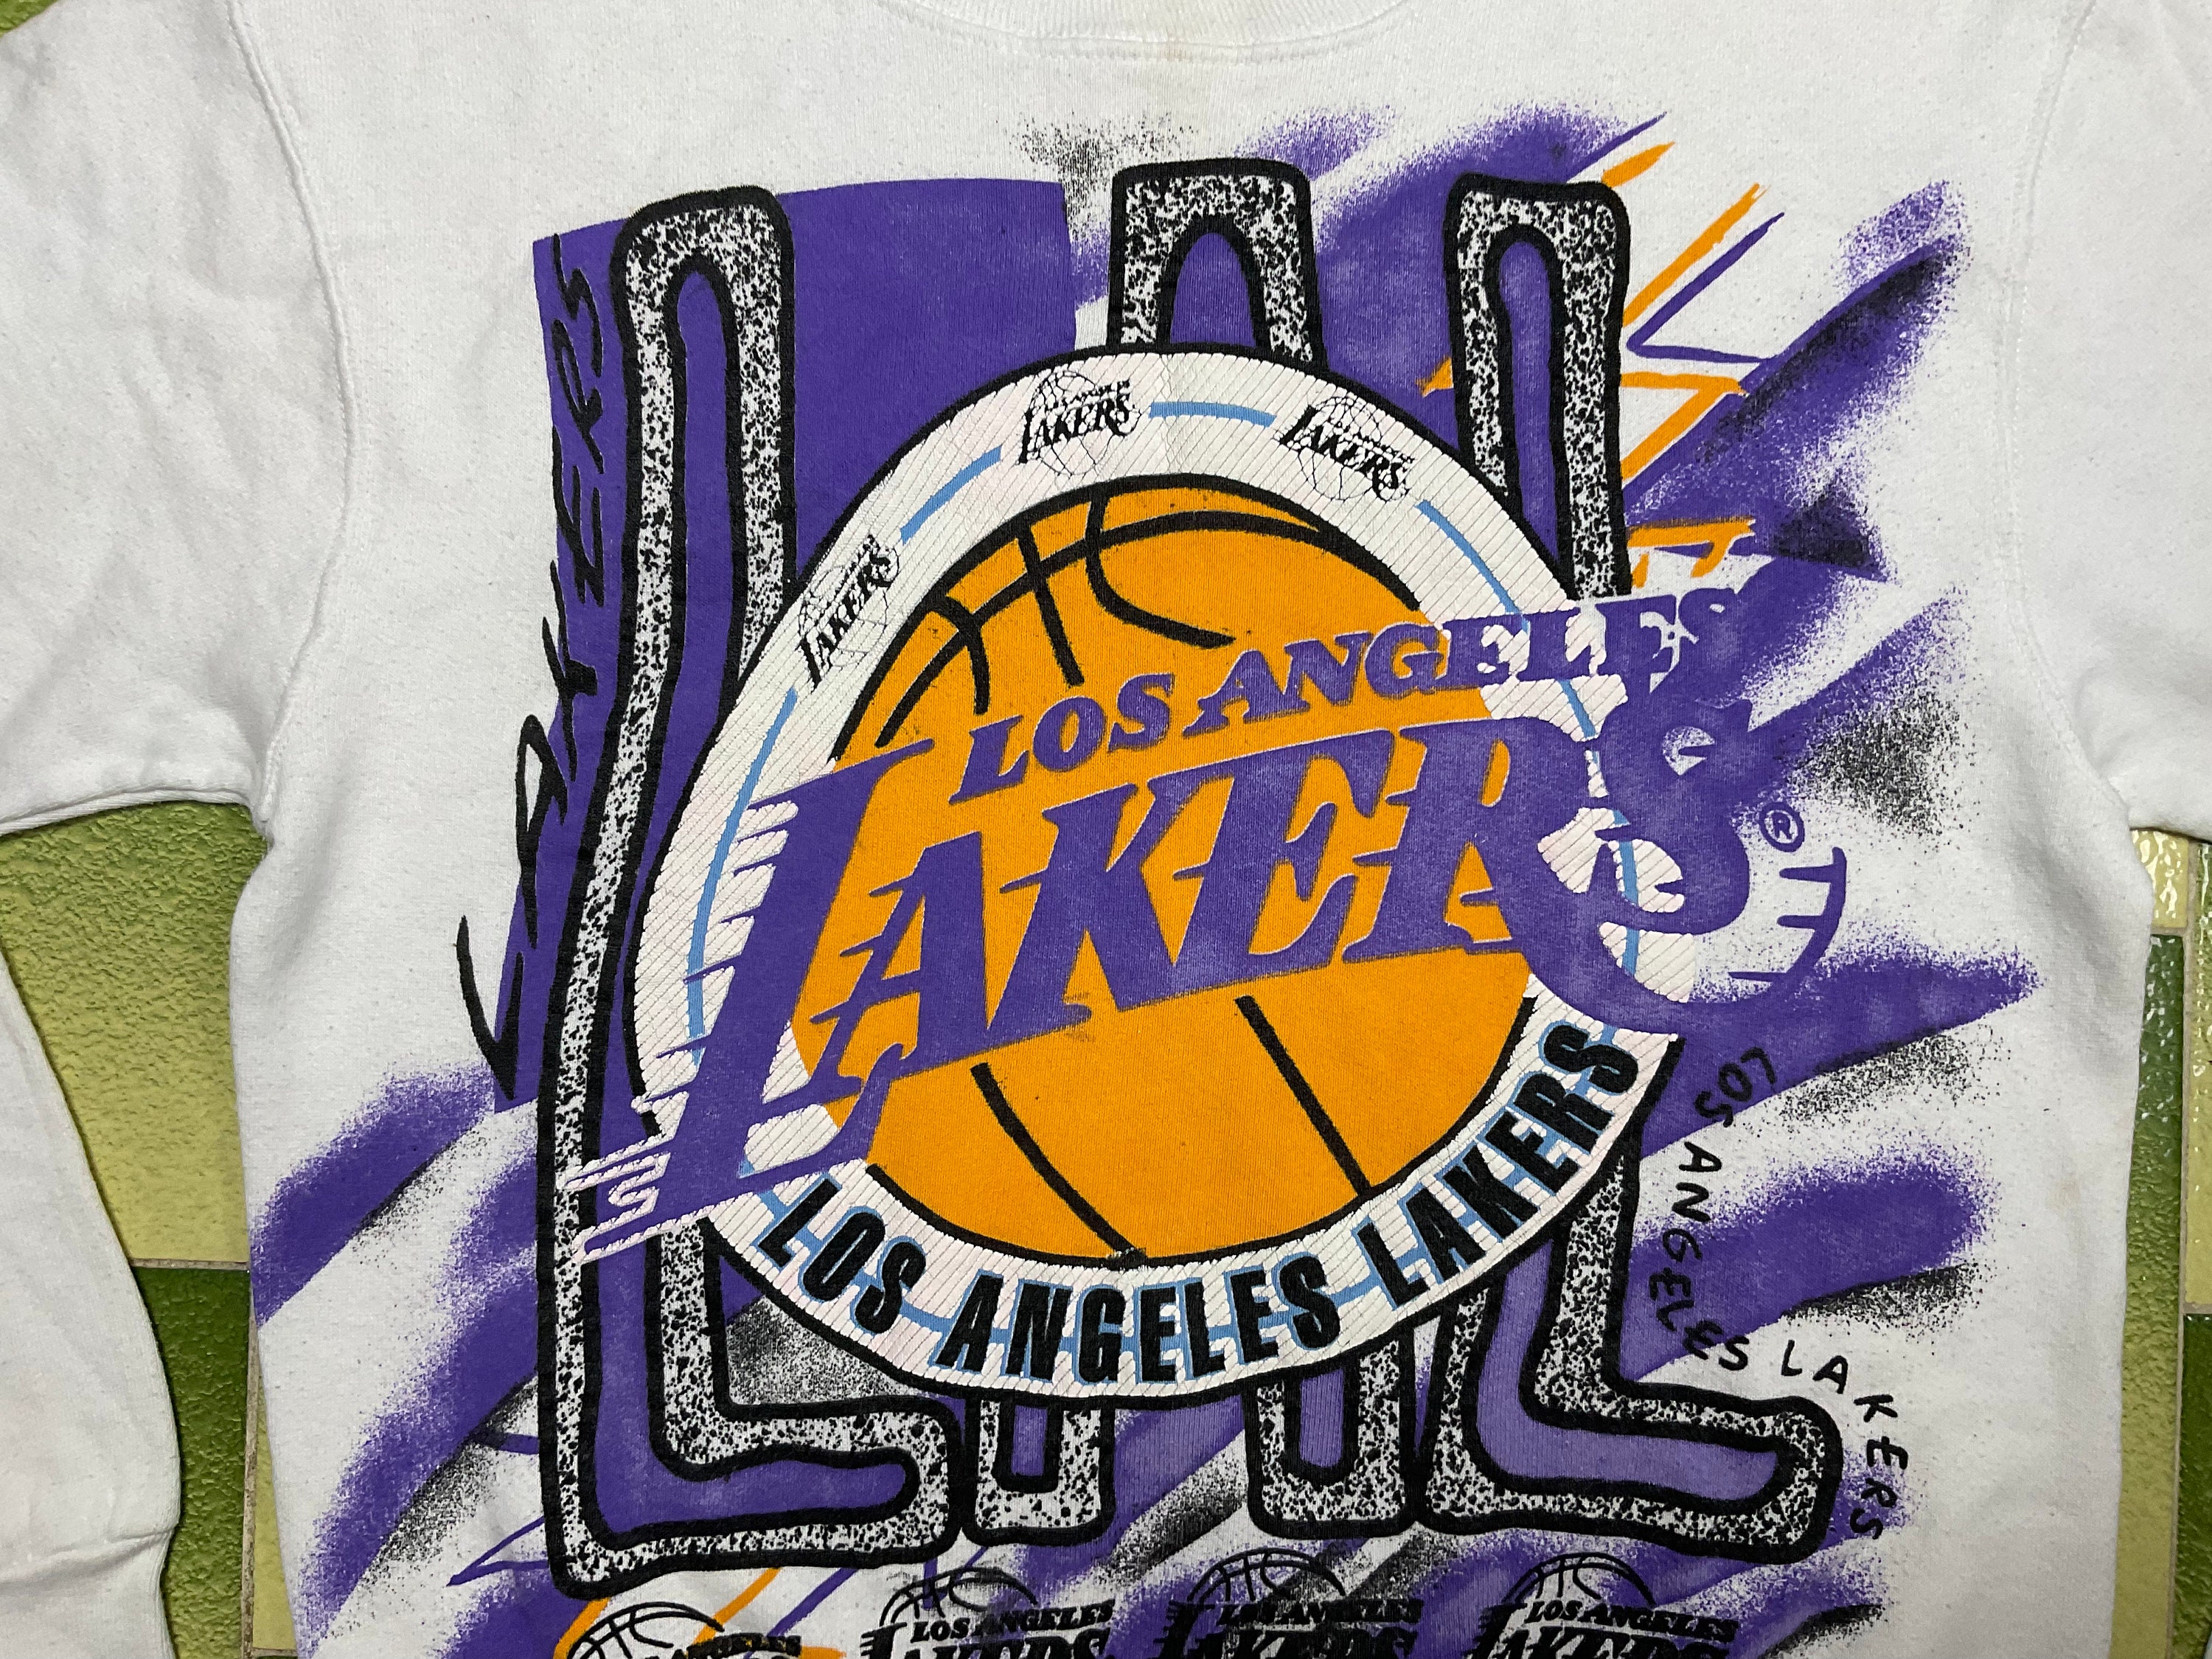 88 Back To Back World Champion LA Lakers Tshirt Sweatshirt Hoodie Crewneck  Sweatshirt Pullover Reprinted Full Color Full Size Gifts for NBA Fans -  Bluefink